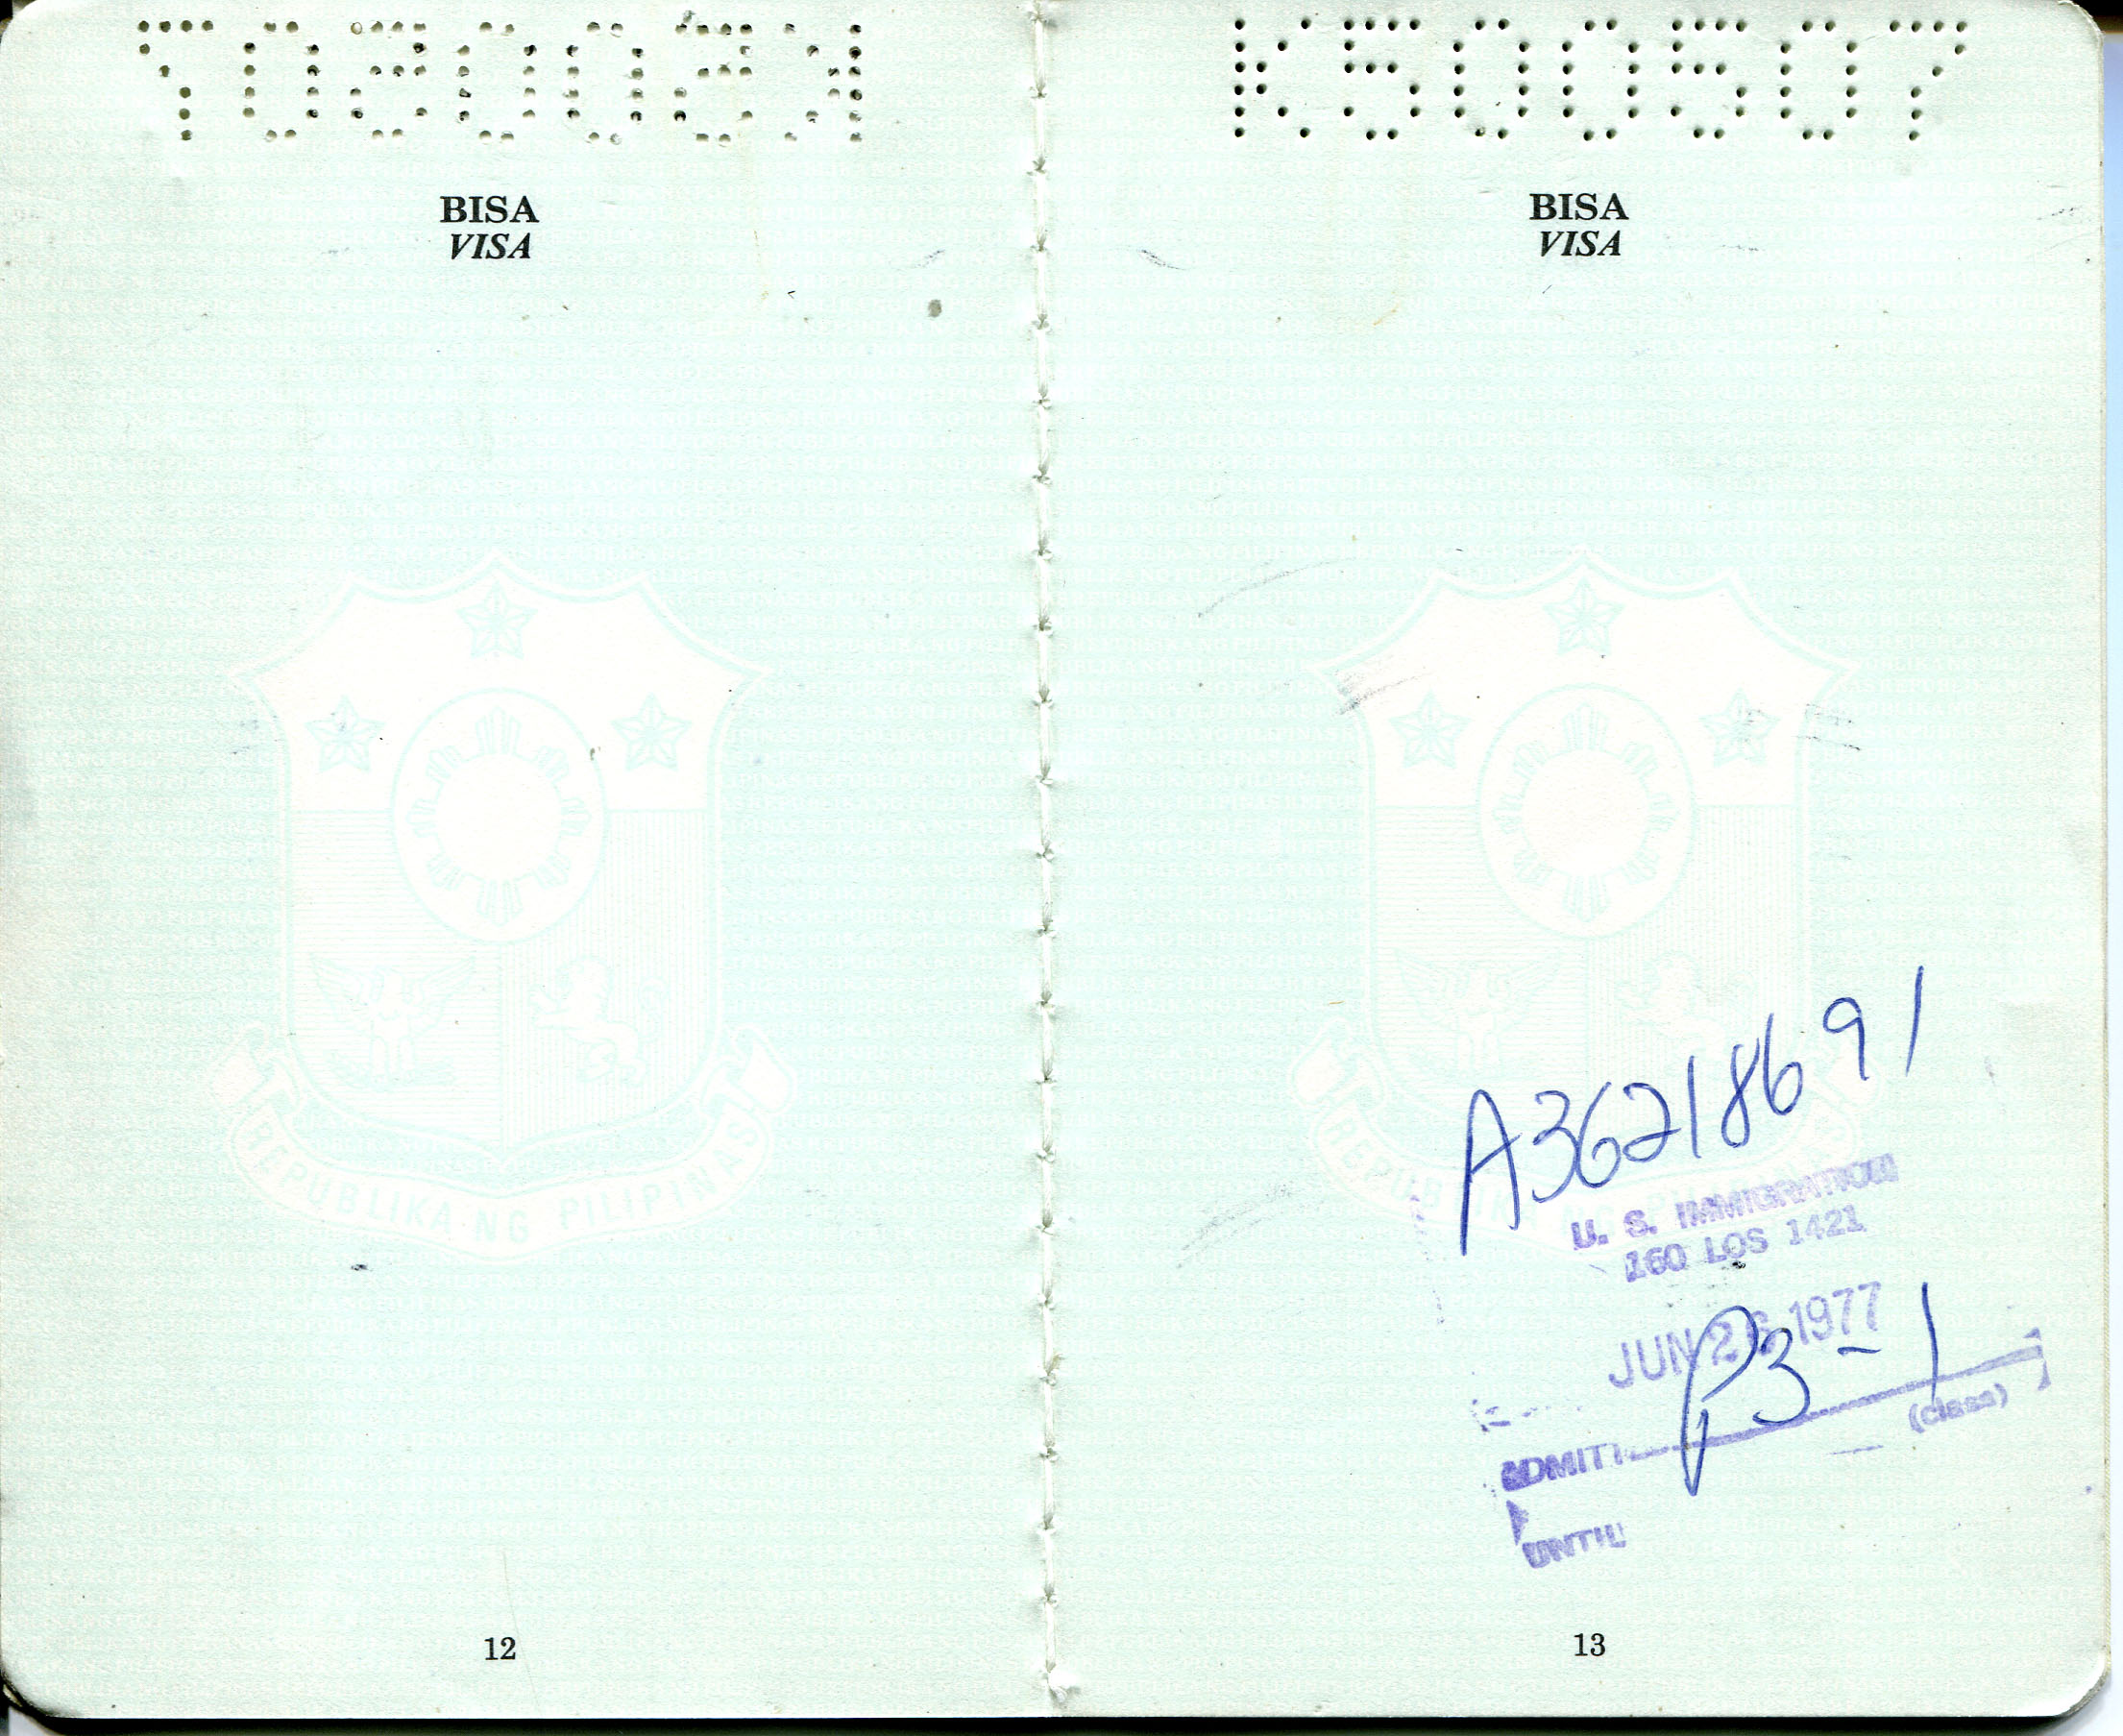 'Scan - Pages 12 and 13 of passport of Etta McKenna.1976 Passport from the Philippine Immigration Office, during process to immigrate to the US.Names of passport pages in Wika Filipino “Pasaporte” and “Republica”Notes from Sarah Carlson, in discussion with McKenna: “First Phil. passport I used when I immigrated to the US in 1977. It reminded me of the months of overtime work in order to afford, prepare and complete all documents needed to come to the US. Without any relatives tosupport me in the US, I had to make sure I had enough to support myself the first few months in the new land until I got a job. The process, even though difficult, is worth remembering.” Any views, findings, conclusions, or recommendations expressed in this story do not necessarily represent those of the National Endowment for the Humanities. 